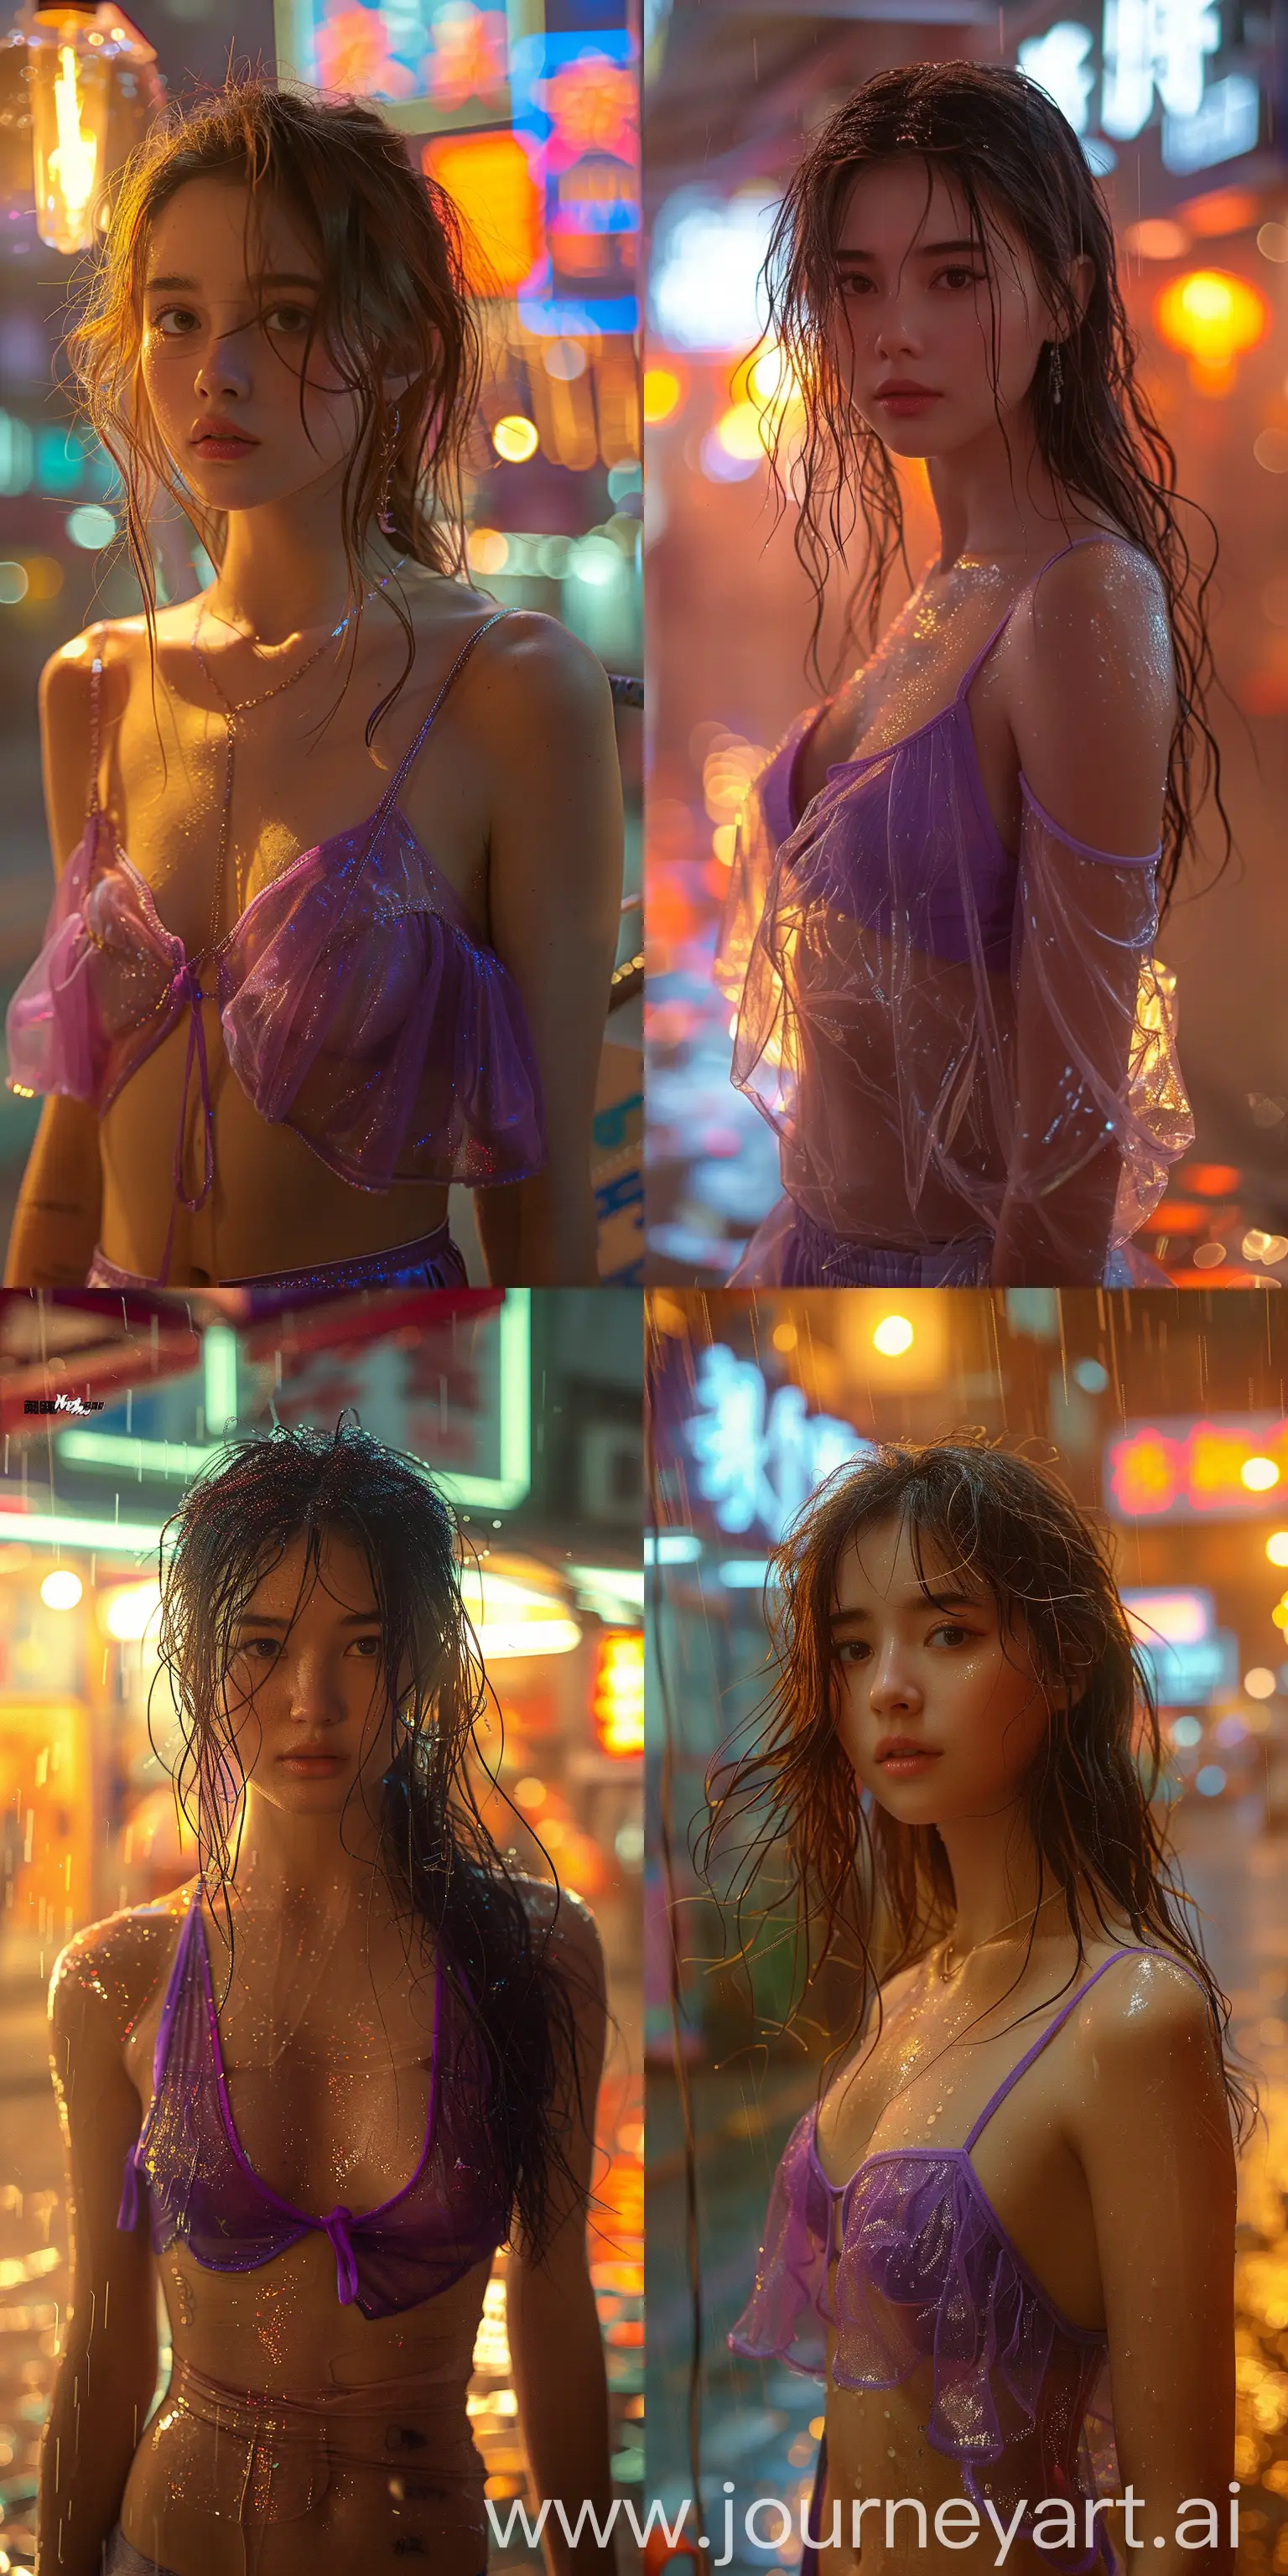 Captivating-Neon-City-Portrait-Purple-Top-Girl-in-Chinapunk-Style